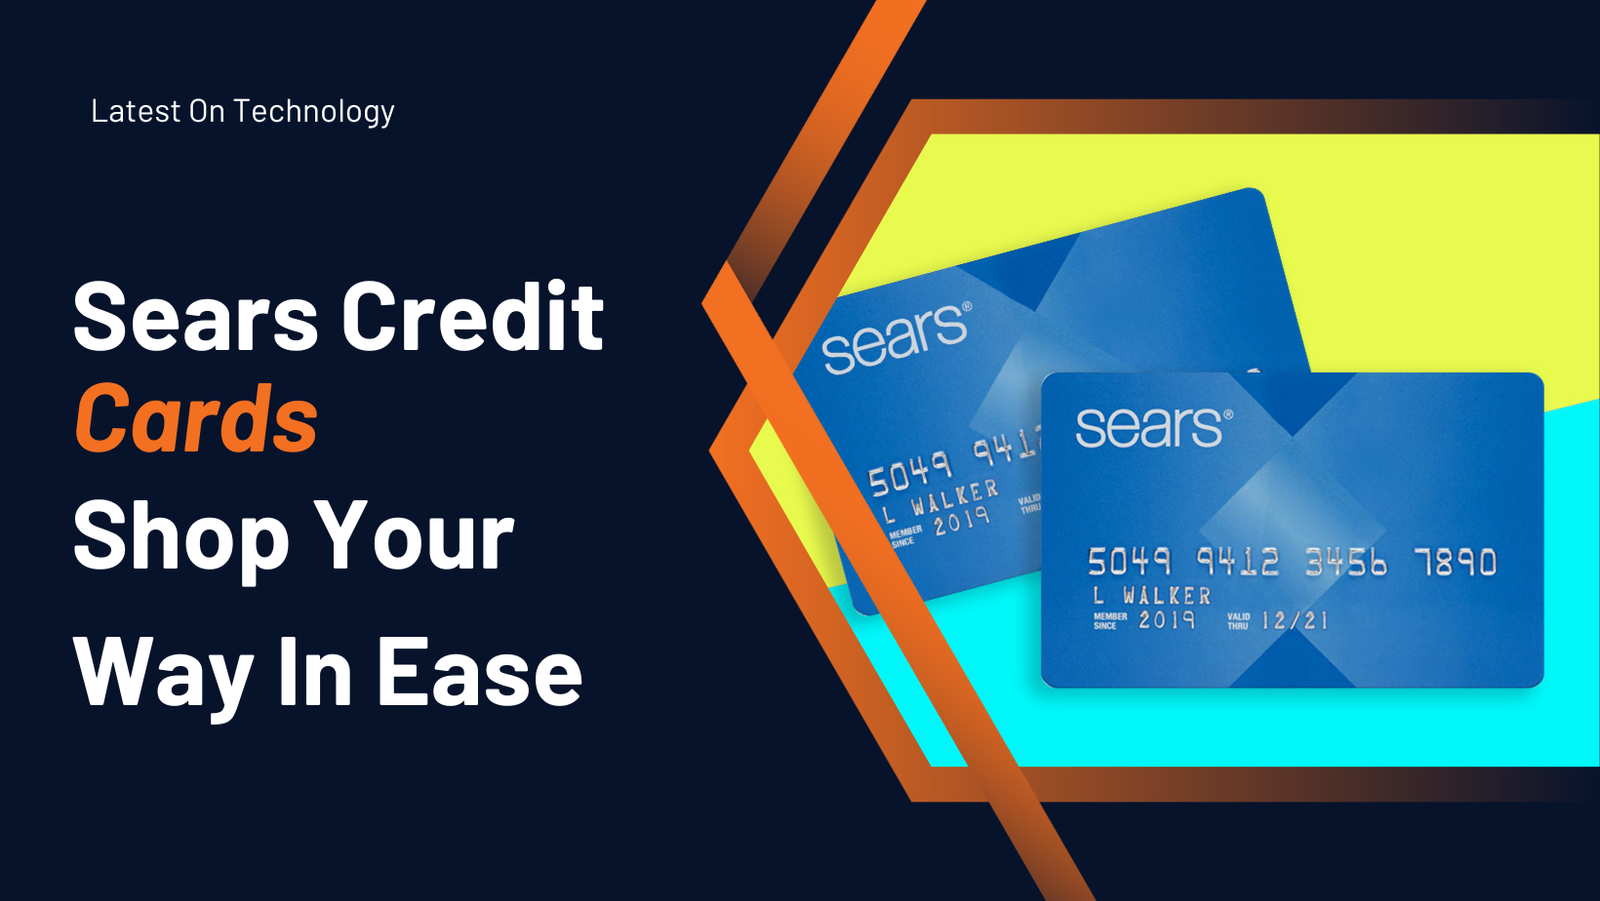 Sears Credit Cards – Shop Your Way In Ease